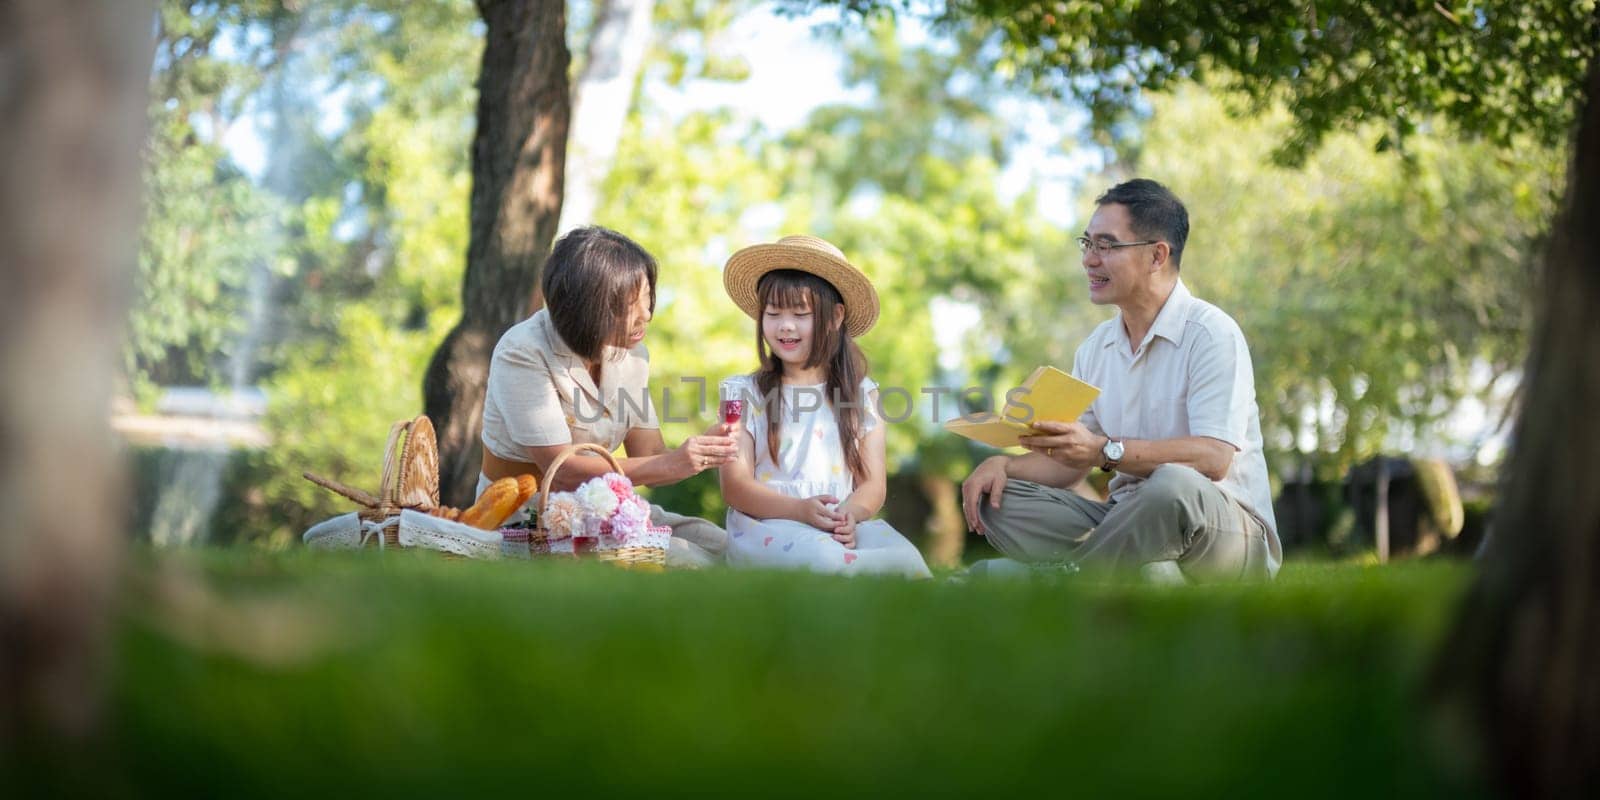 Grandparent playing togetherness with a granddaughter in the park in the morning. Family, love and grandchild bonding with grandfather and grandma in a park. concept child and senior by nateemee